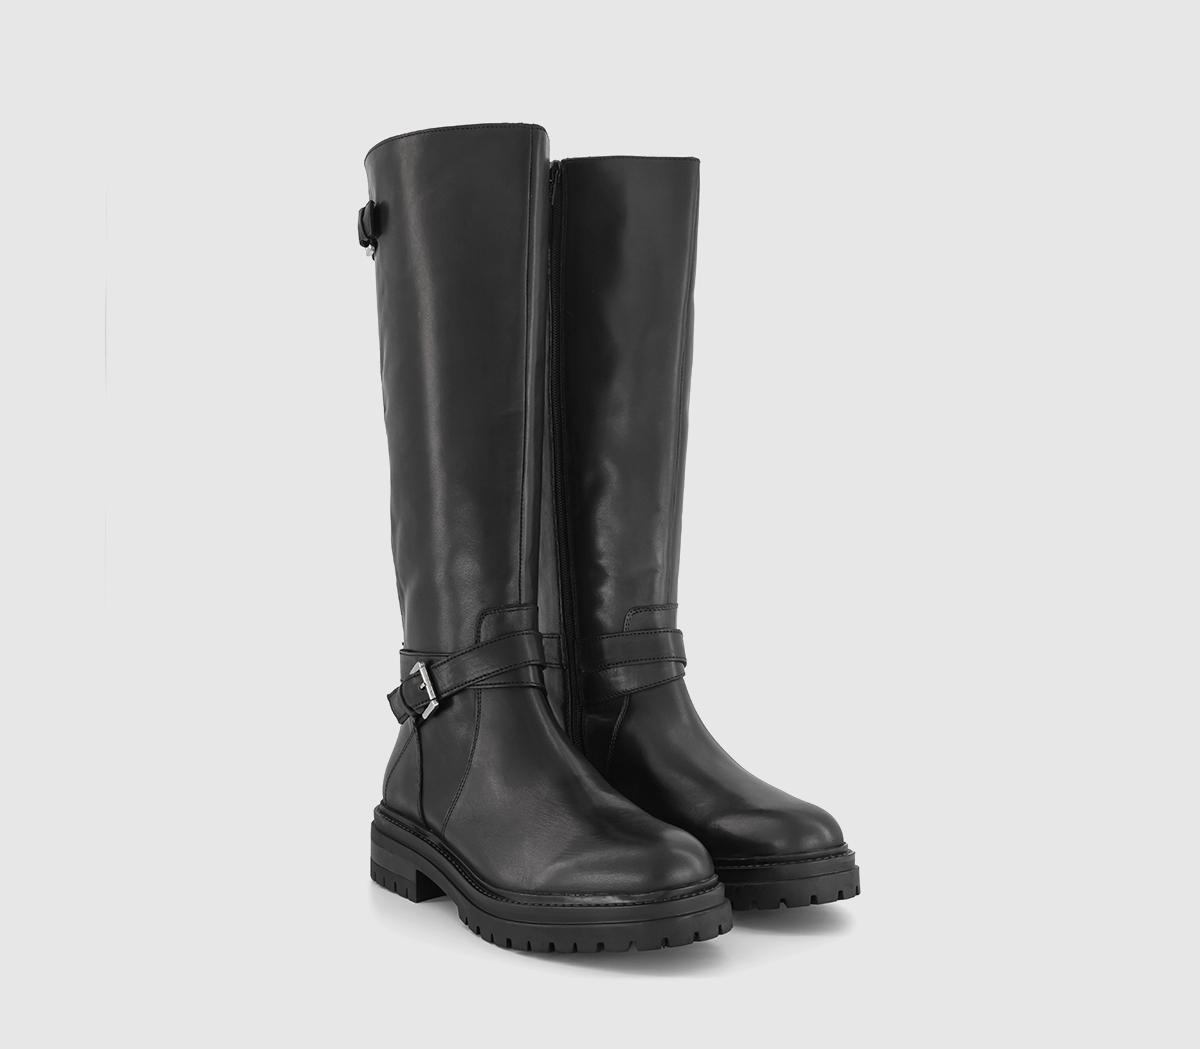 OFFICE Womens Krissy Buckle Strap Knee High Rider Boots Black Leather, 4